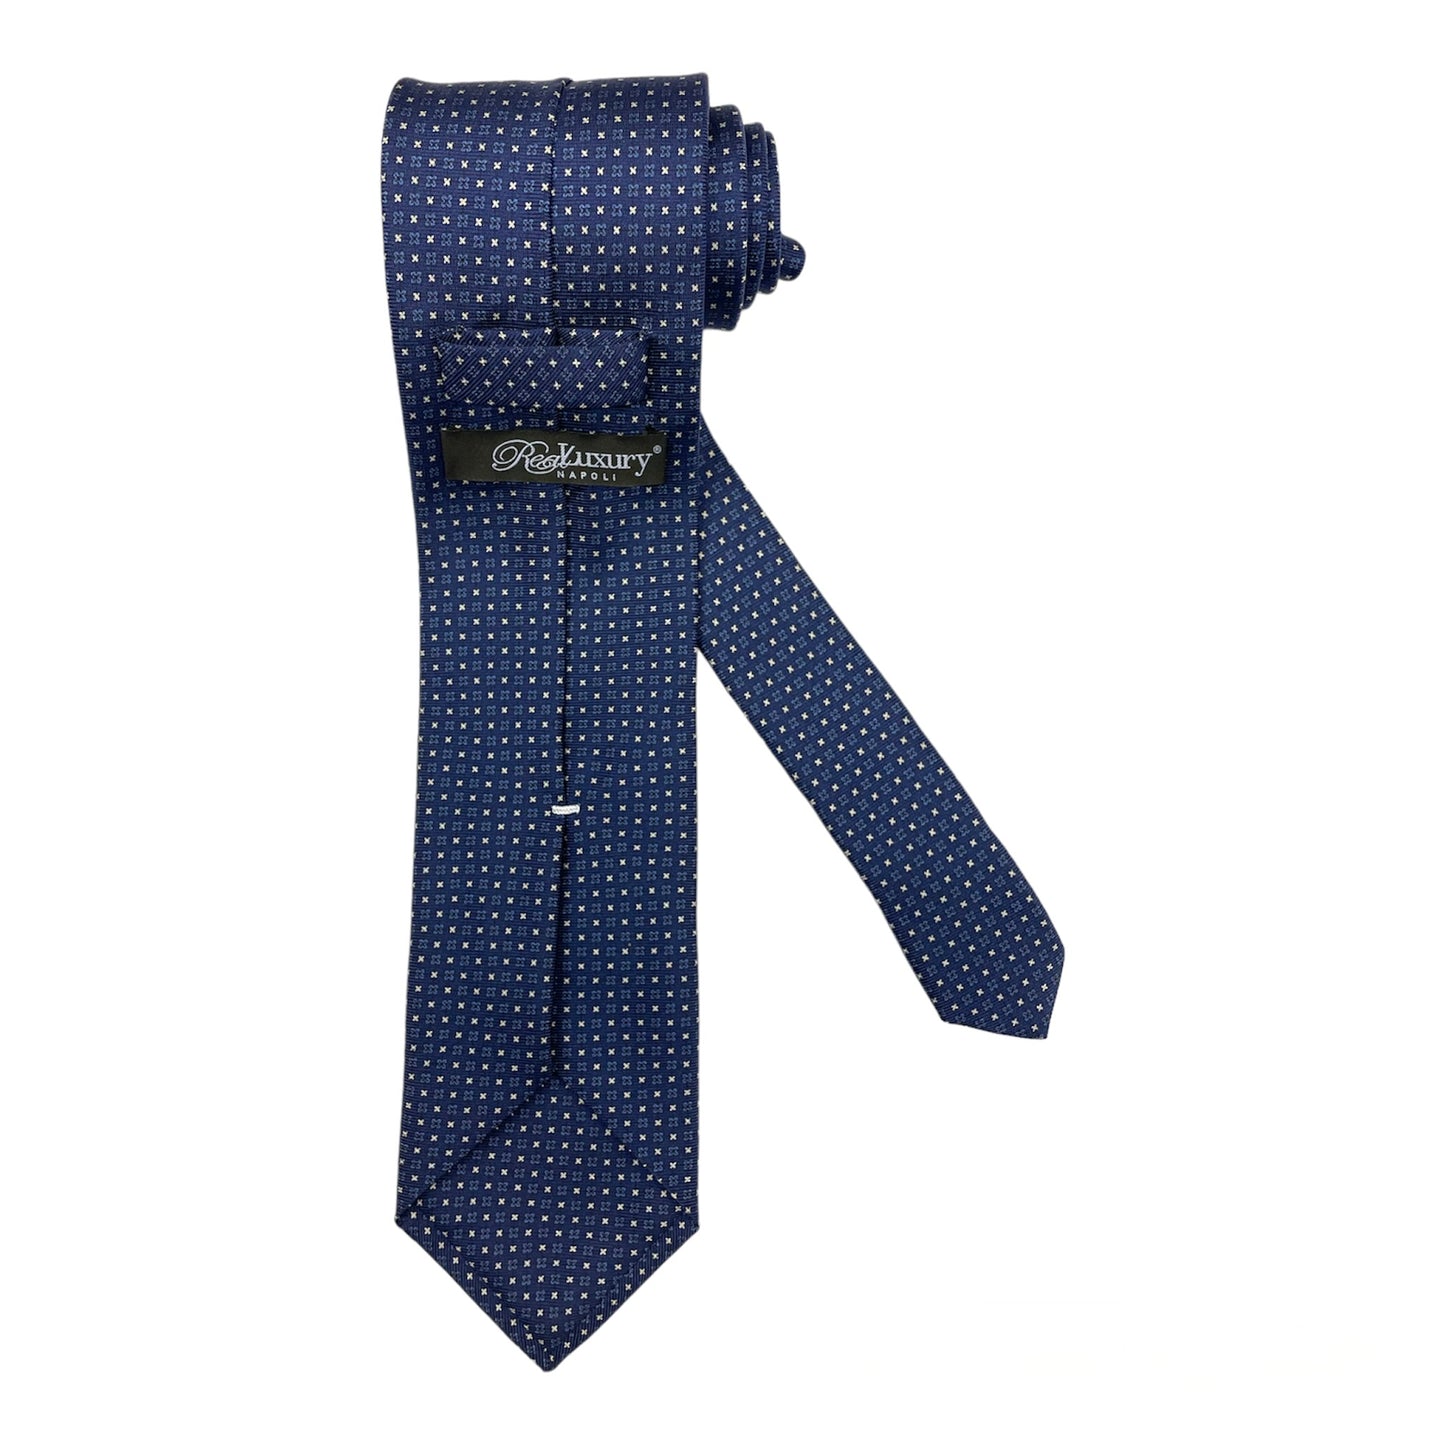 Blue silk tie with white crosses and blue flowers